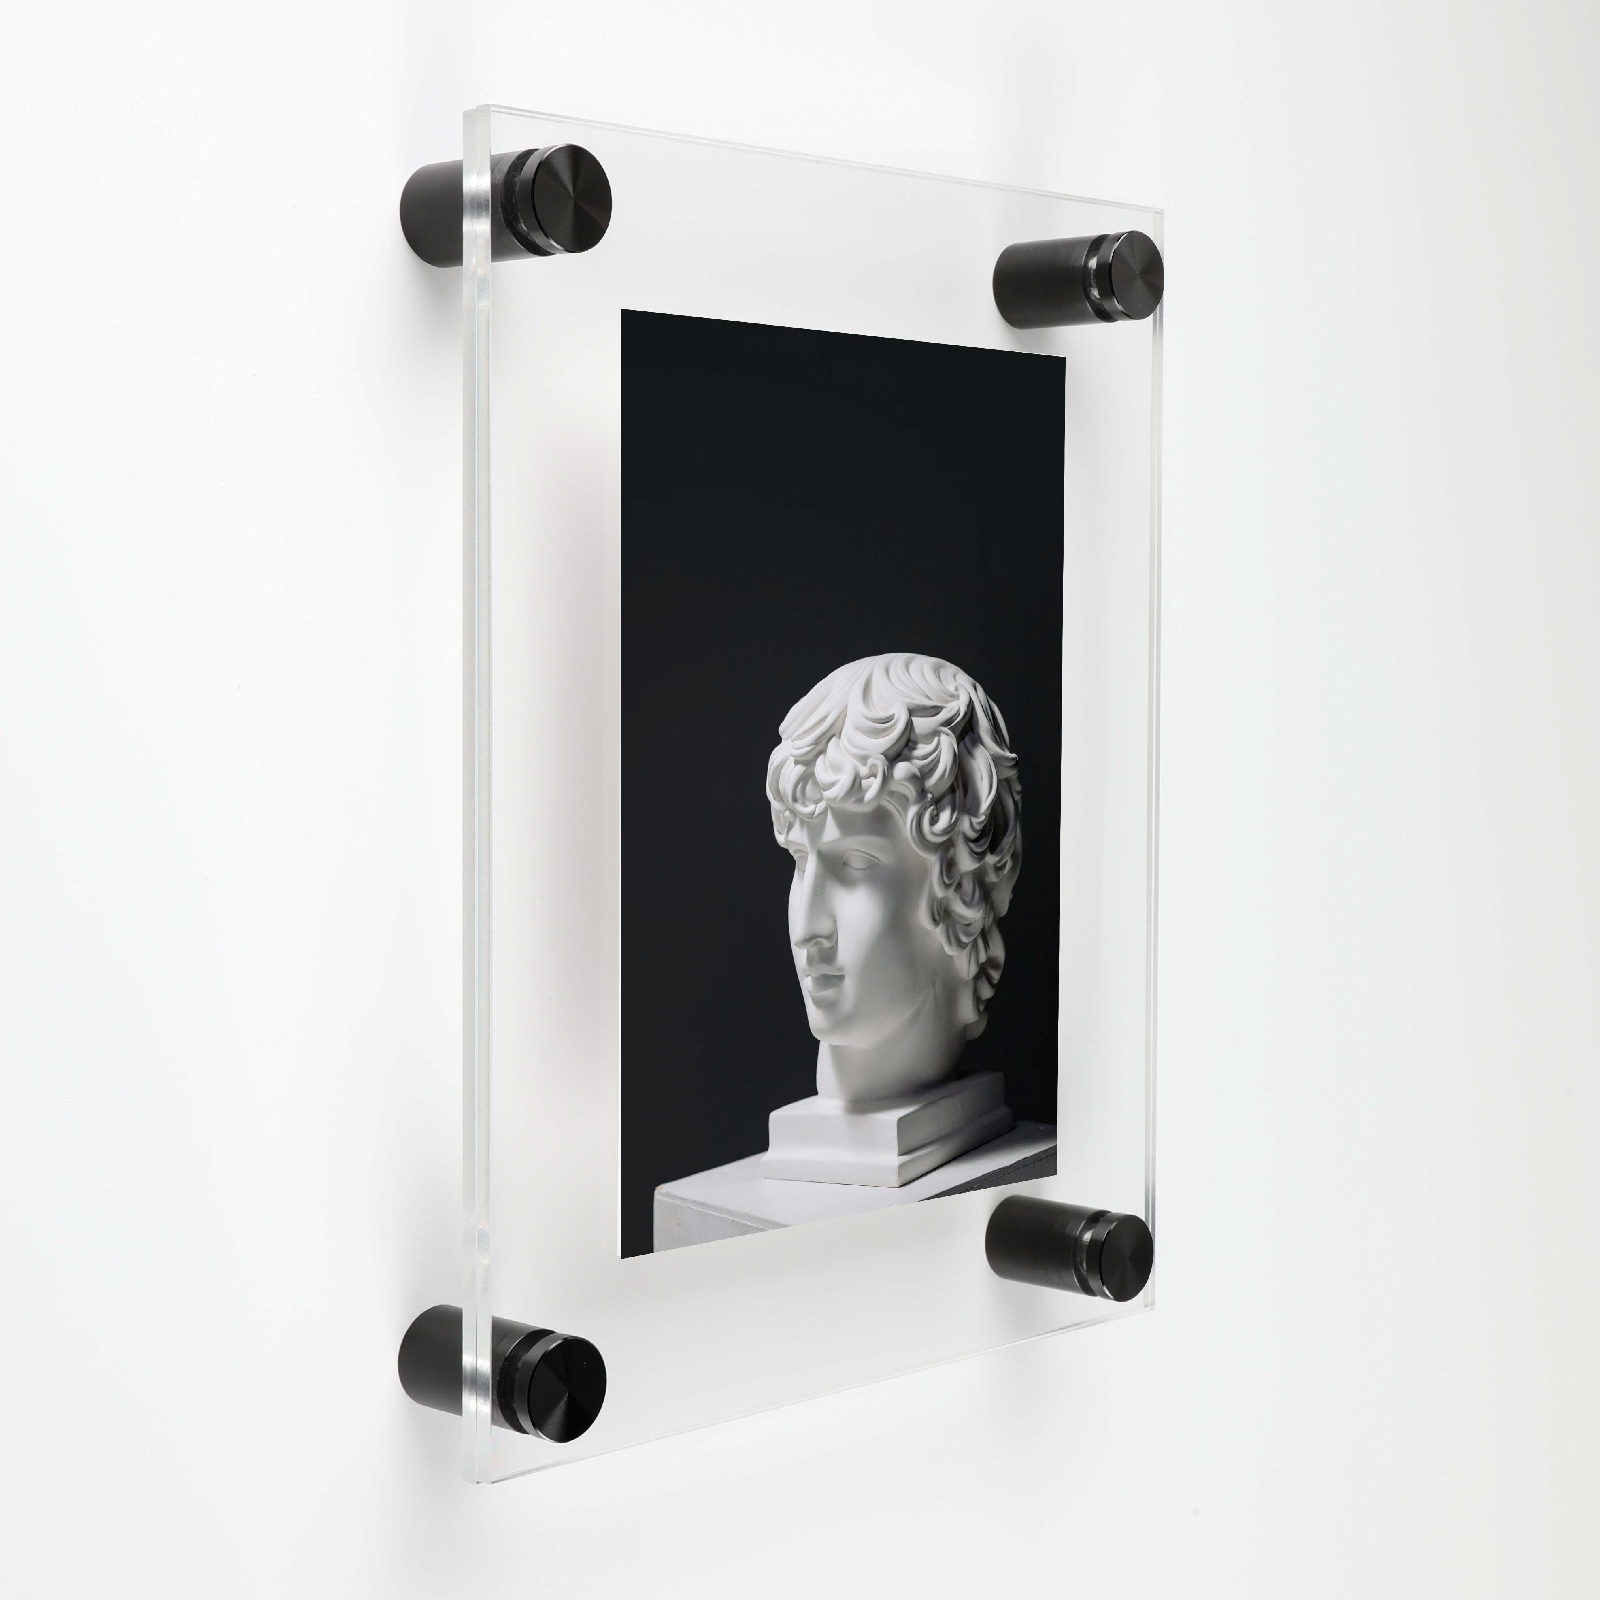 (2) 19-3/4'' x 26'' Clear Acrylics , Pre-Drilled With Polished Edges (Thick 3/16'' each), Wall Frame with (4) 3/4'' x 1'' Black Anodized Aluminum Standoffs includes Screws and Anchors